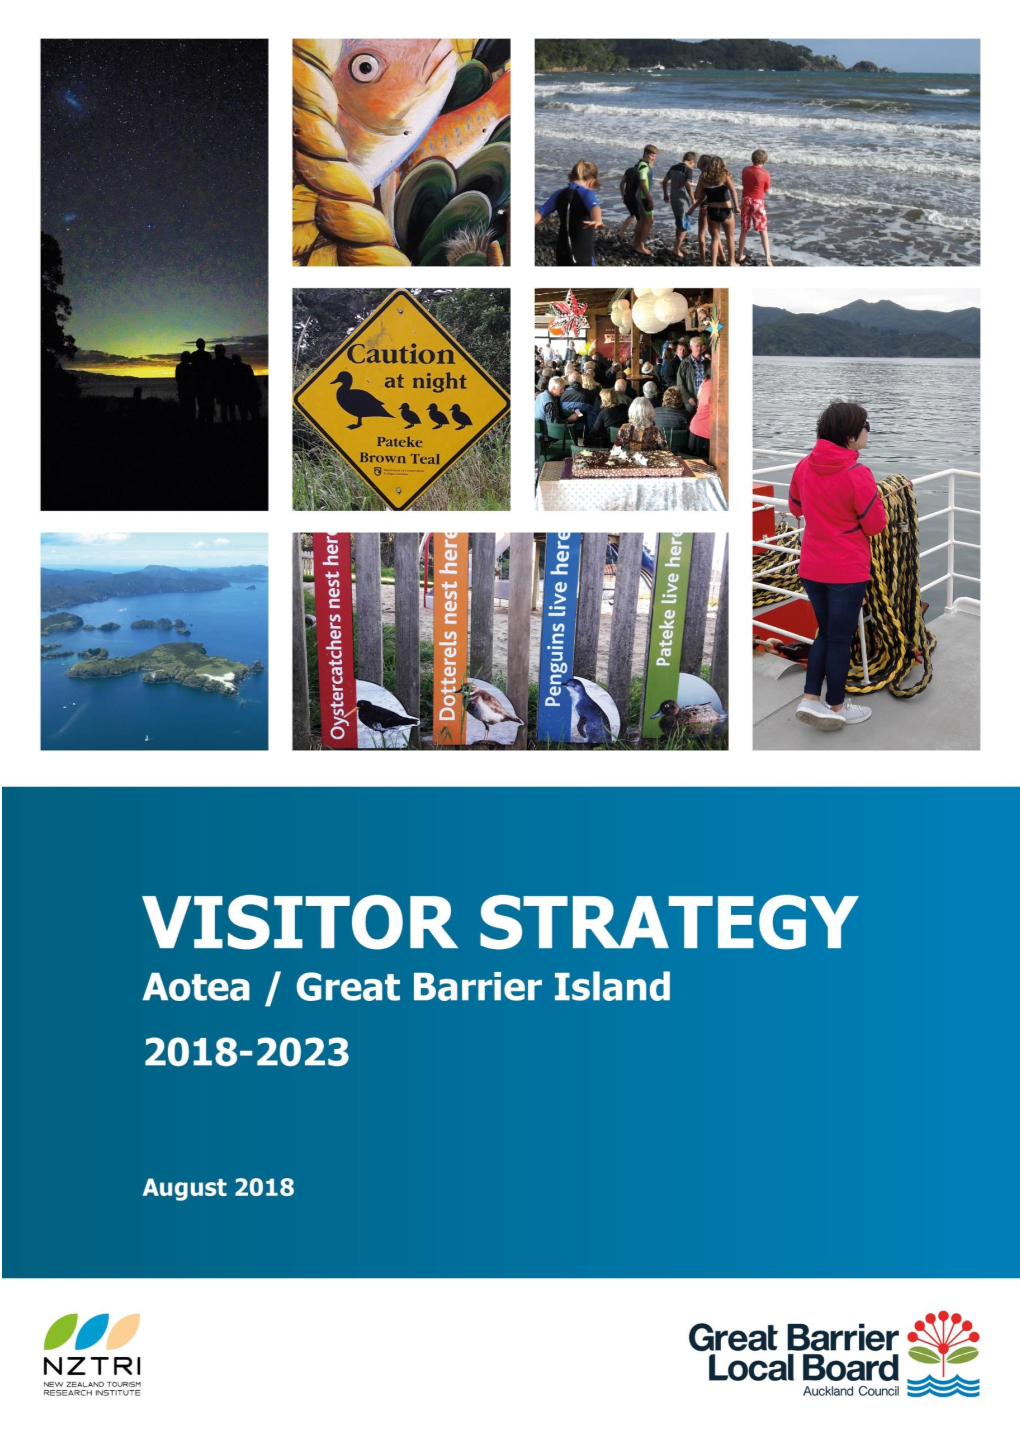 VISITOR STRATEGY AOTEA Great Barrier Island 2018-2023